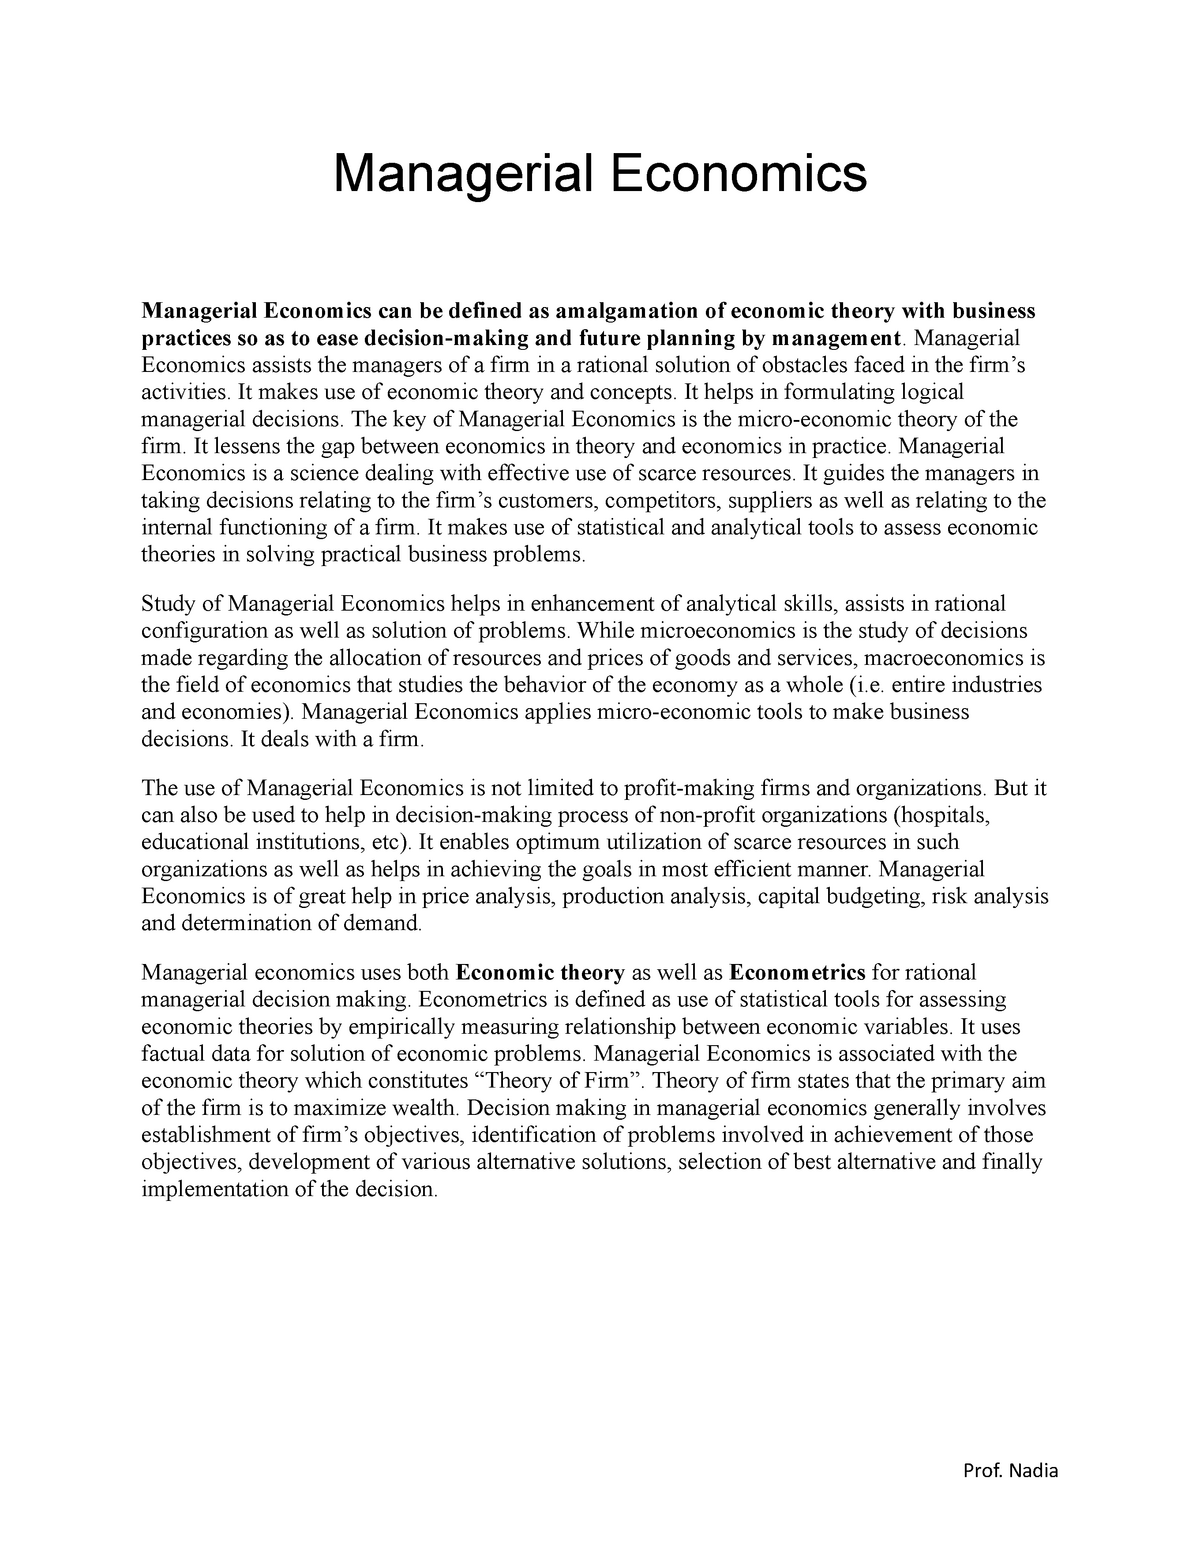 managerial economics article review